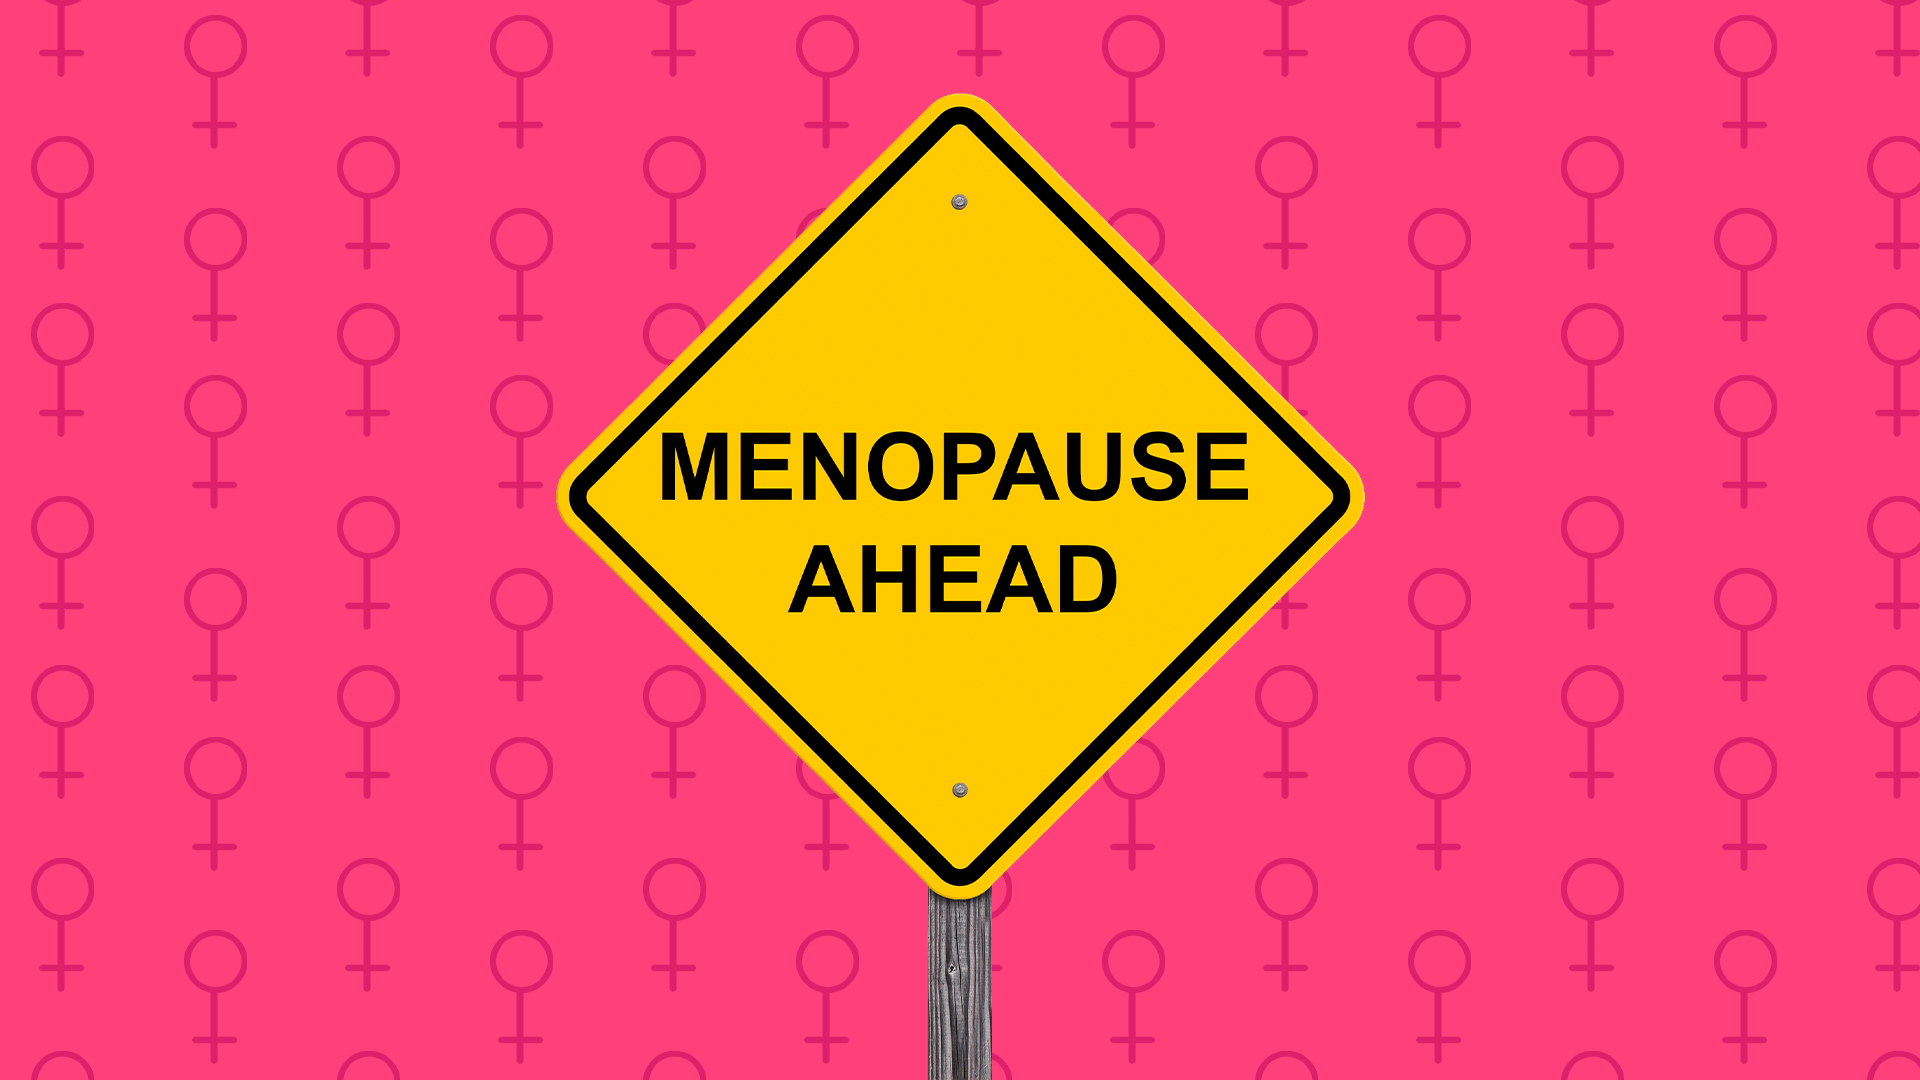 STAGES OF MENOPAUSE